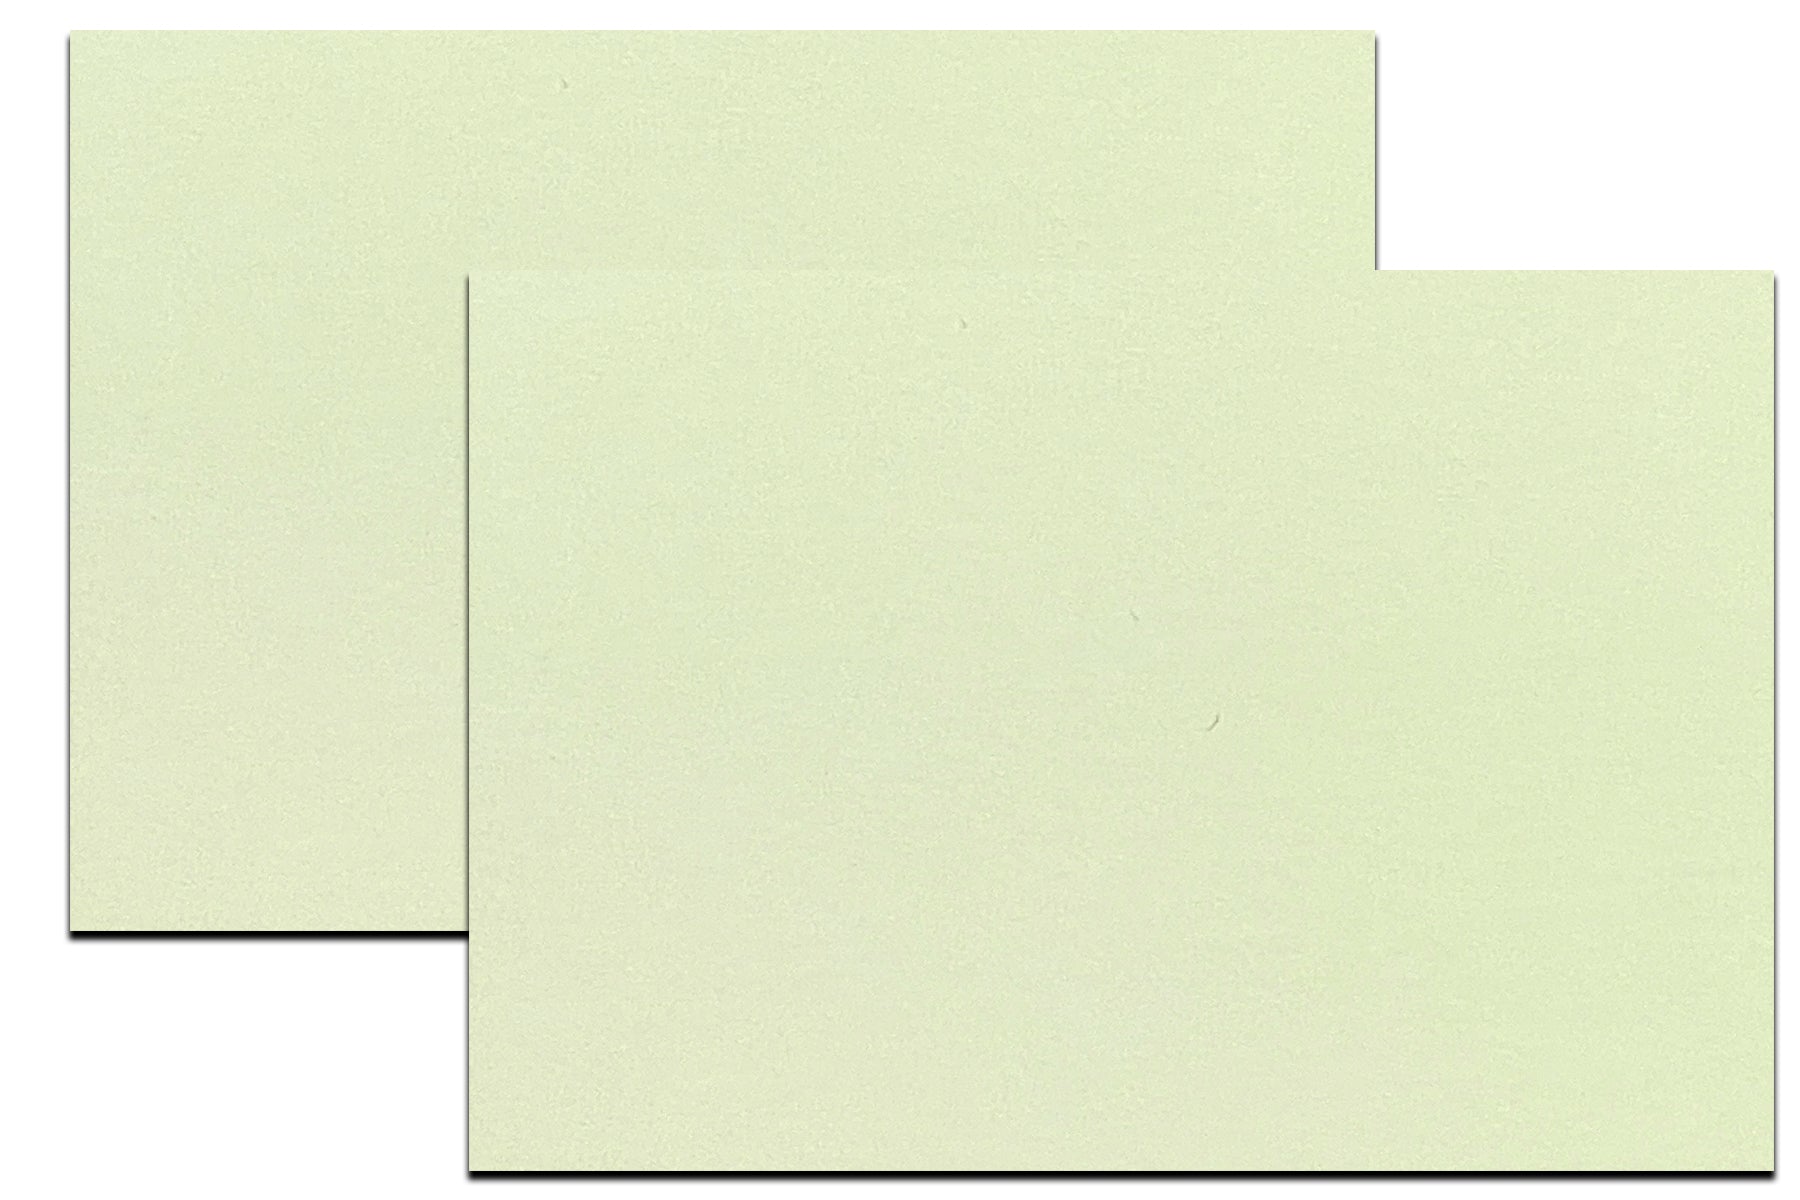 DC Shimmery White Discount Card Stock for DIY Cards and Diecutting